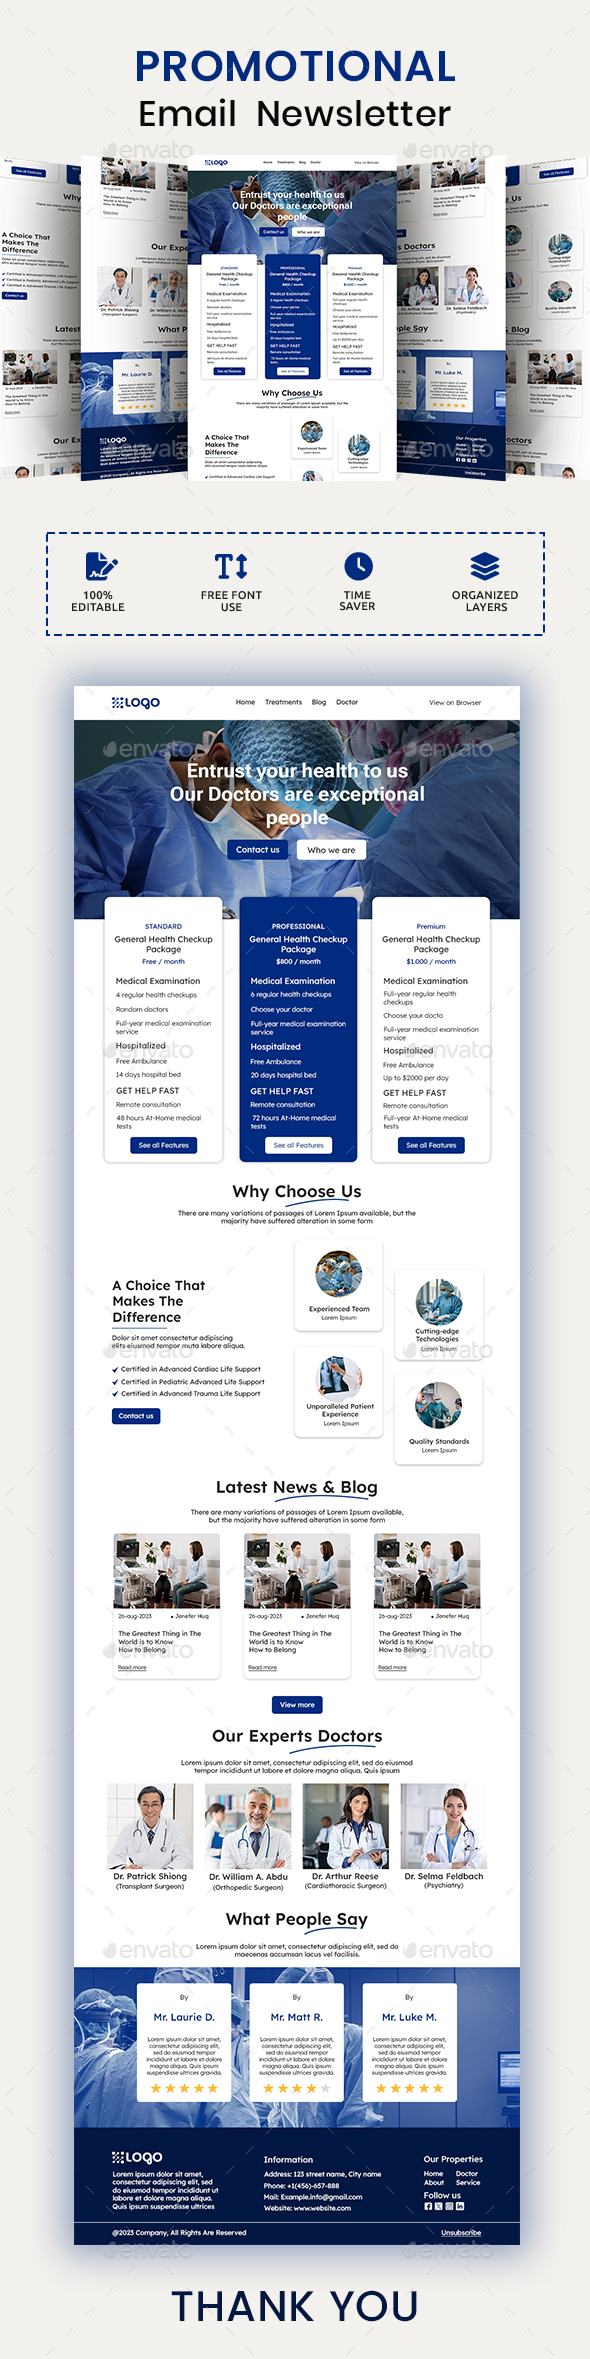 [DOWNLOAD]Medical Healthcare Email Newsletter PSD Template